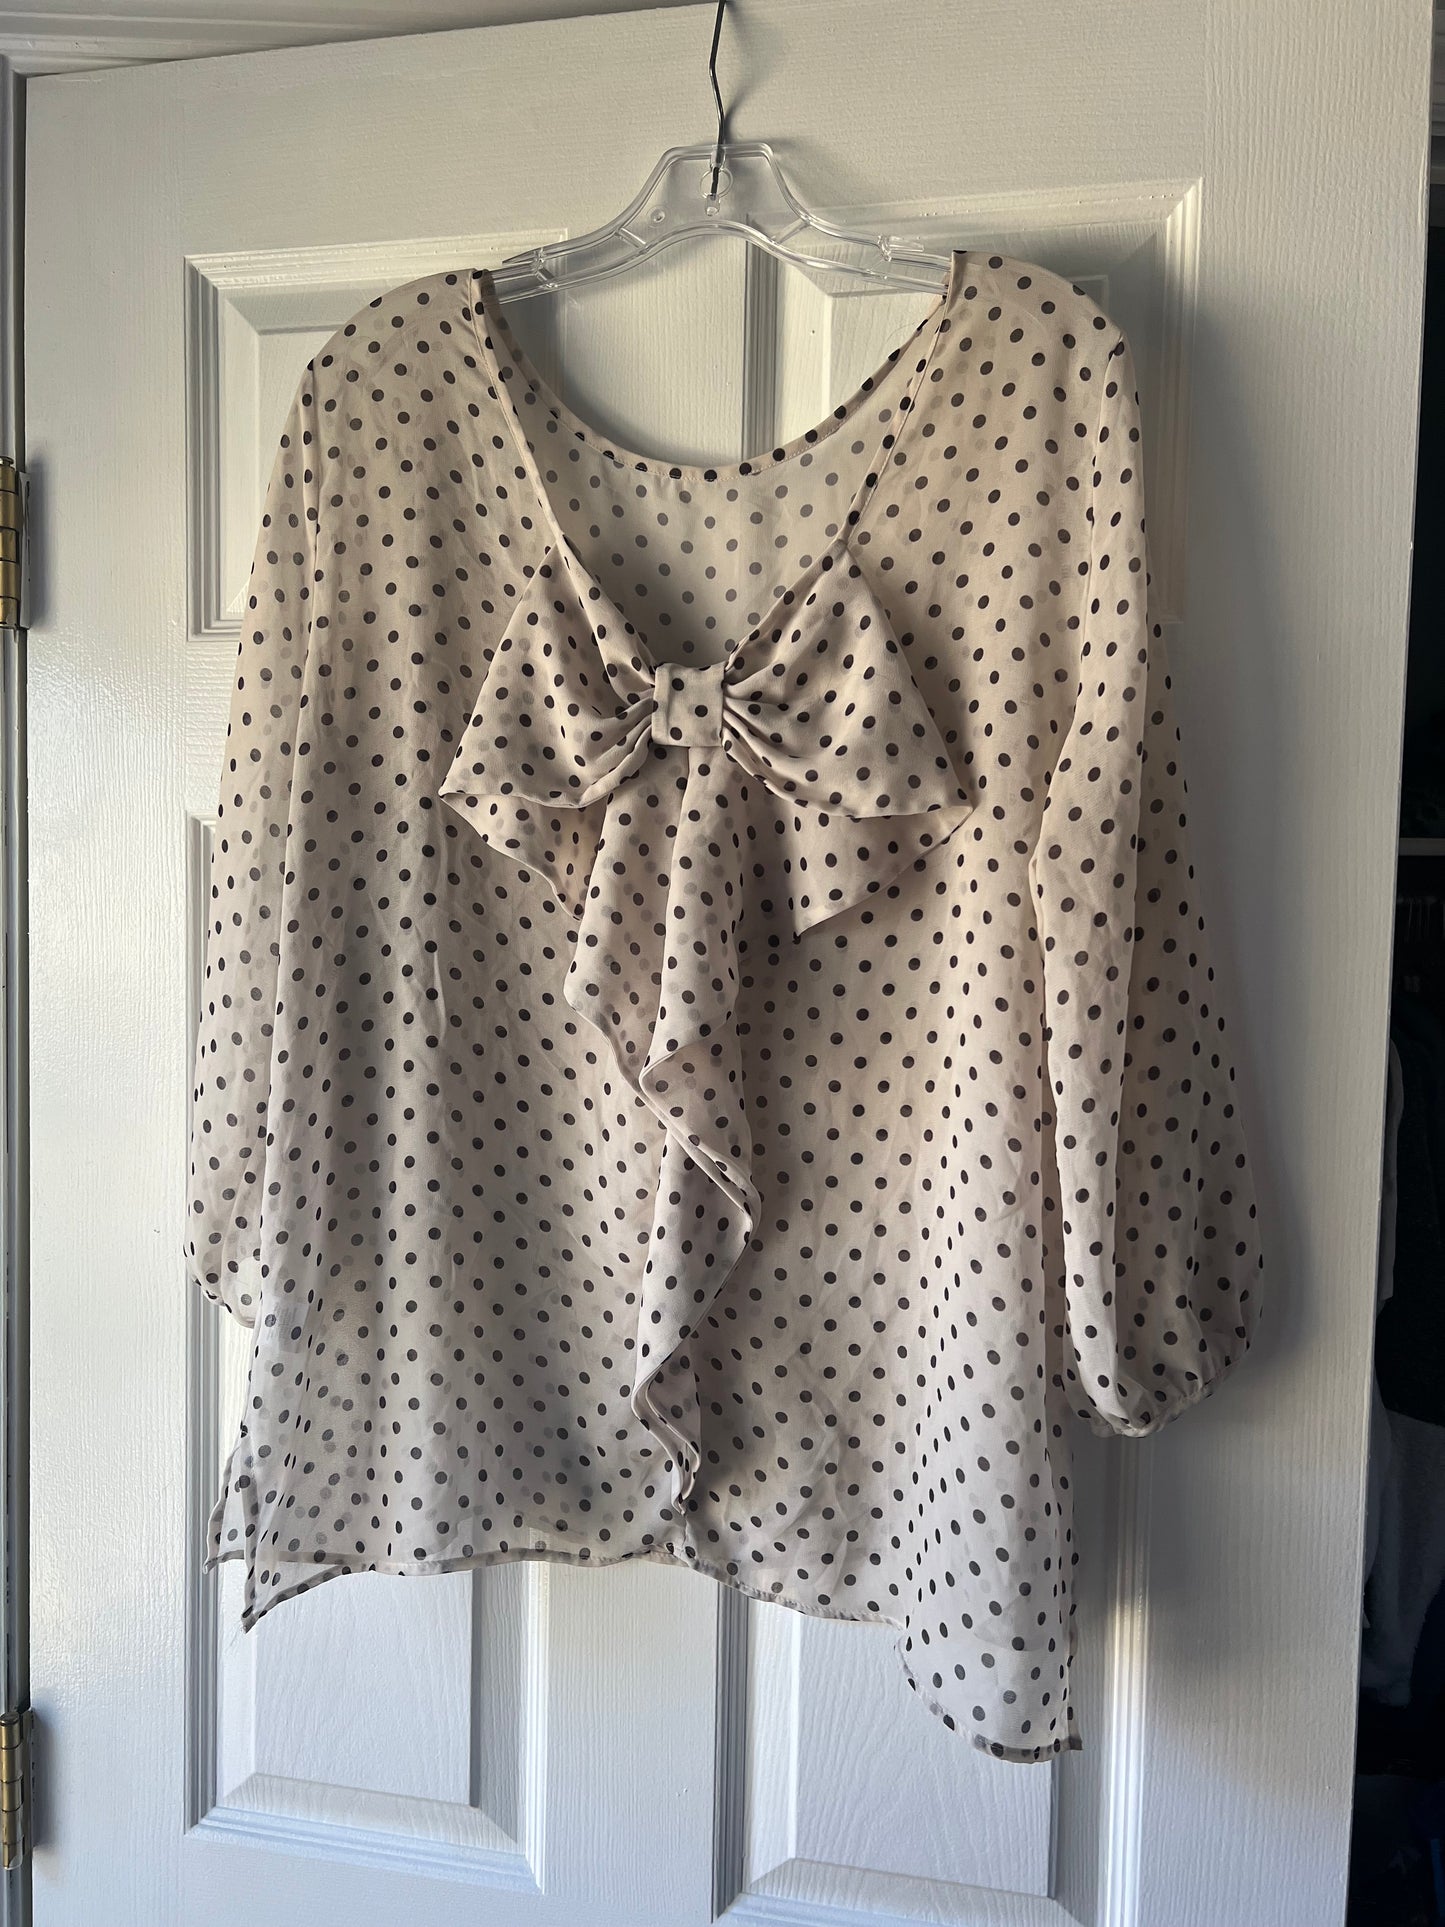 **REDUCED** Sweet Pea by New York and Company Women's Cream and Black Polka Dot Blouse Size L